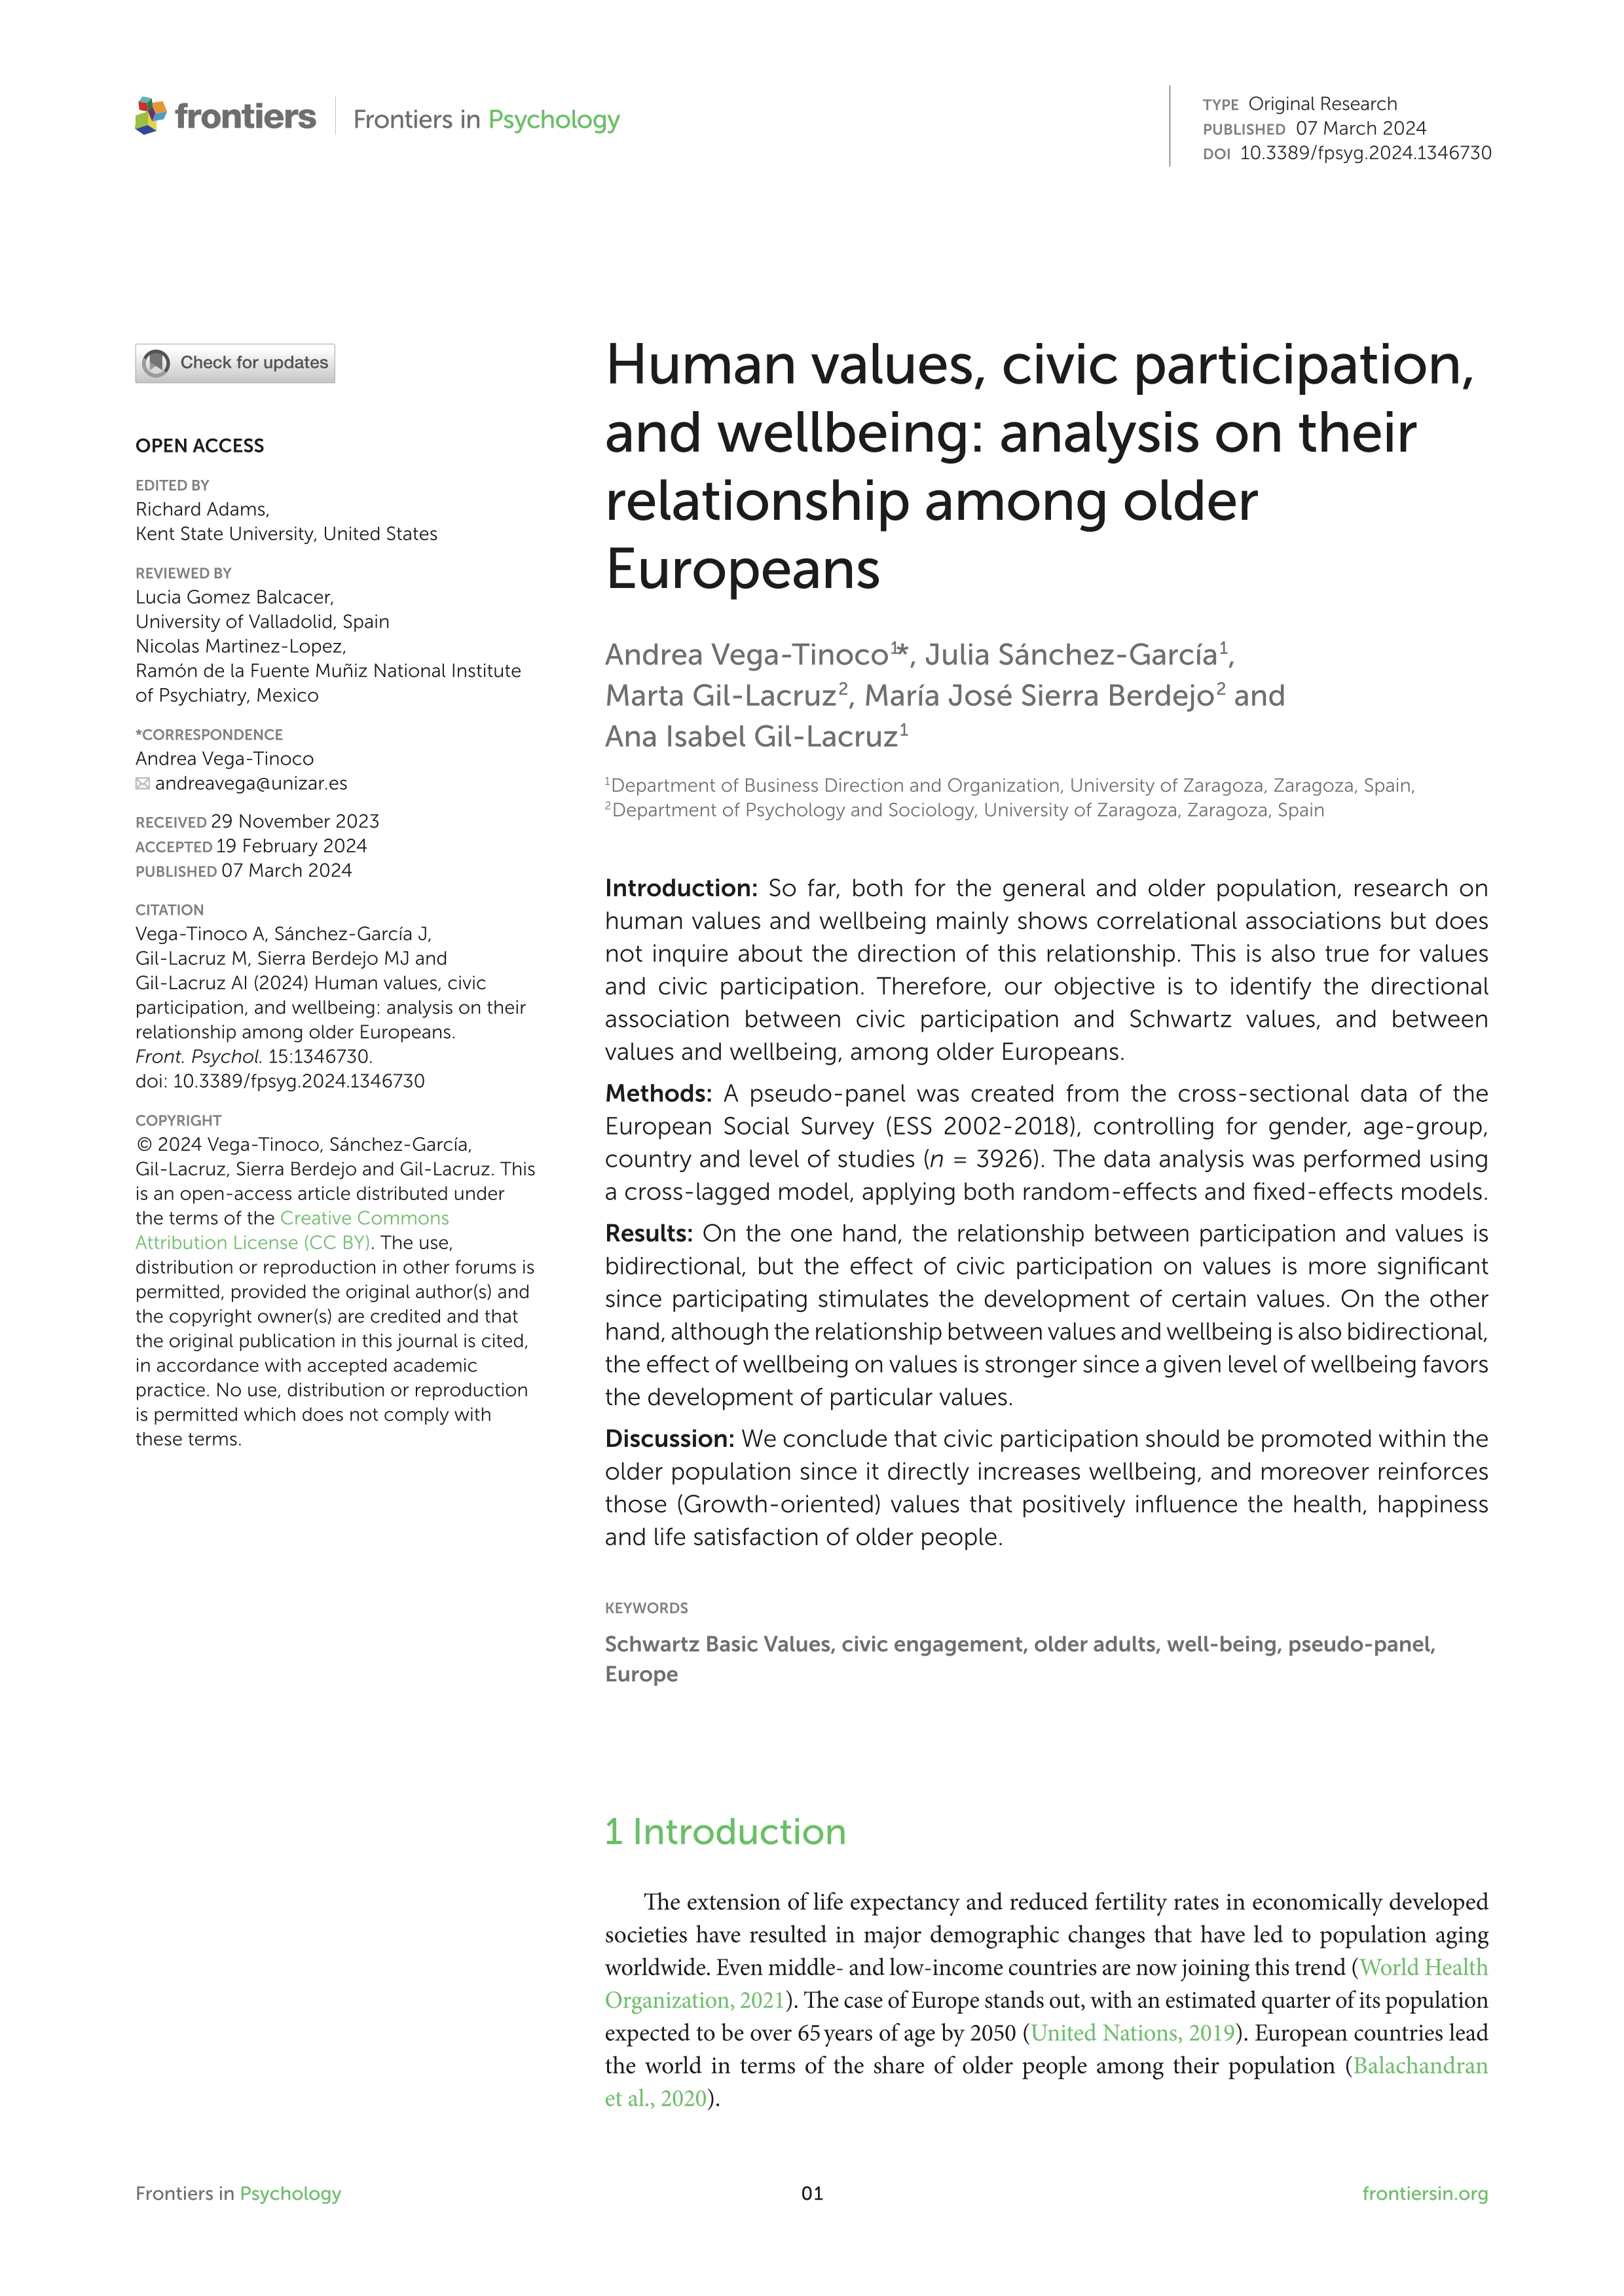 Human values, civic participation, and wellbeing: analysis on their relationship among older Europeans